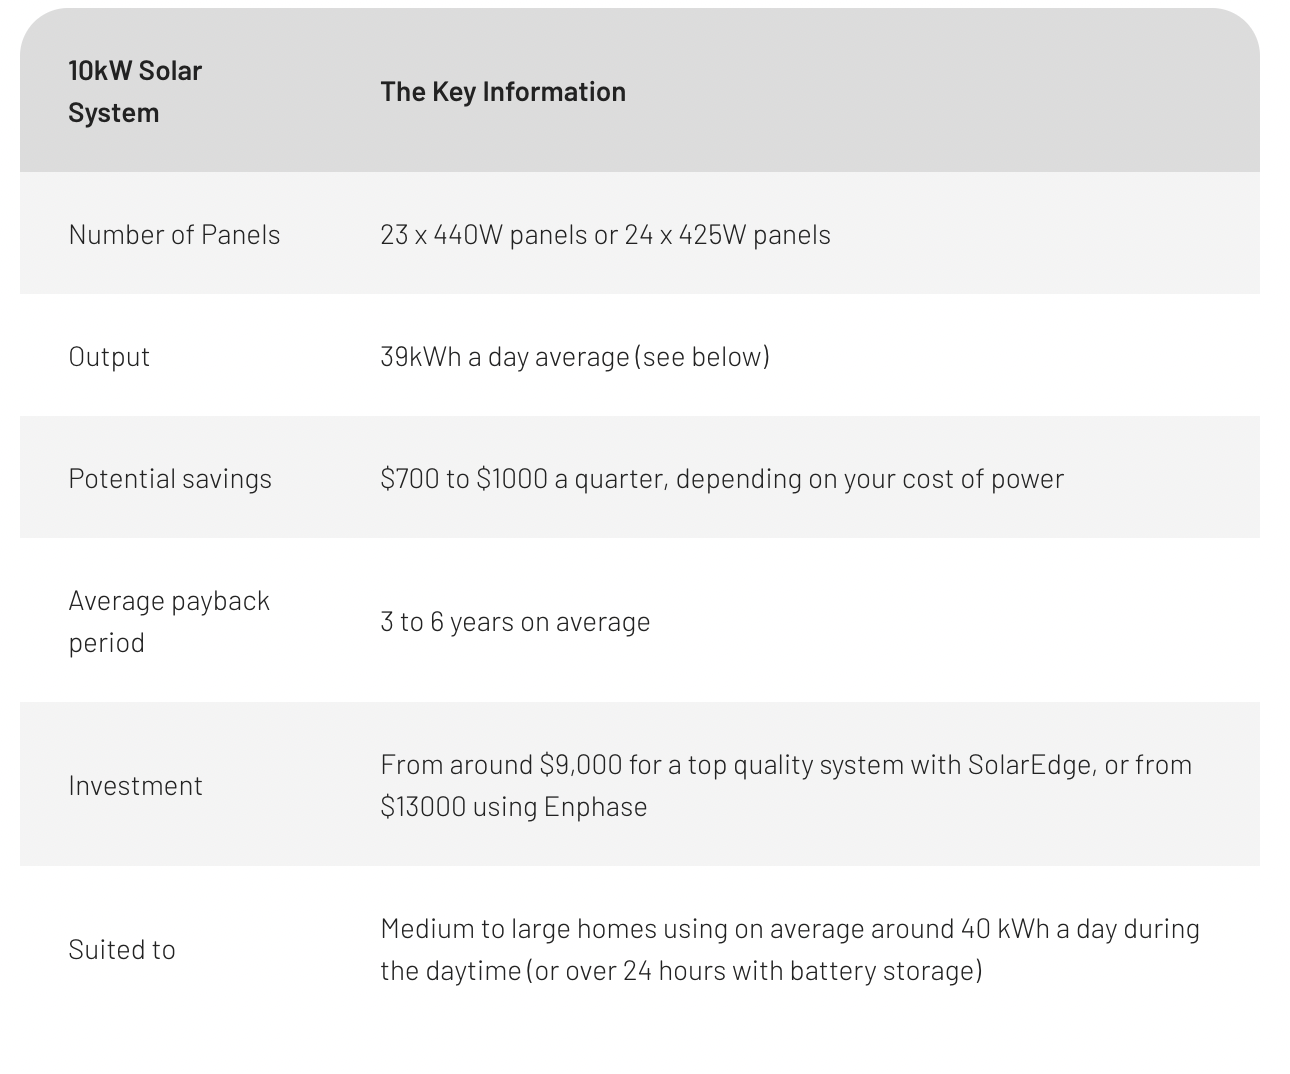 10kW solar system key numbers and information